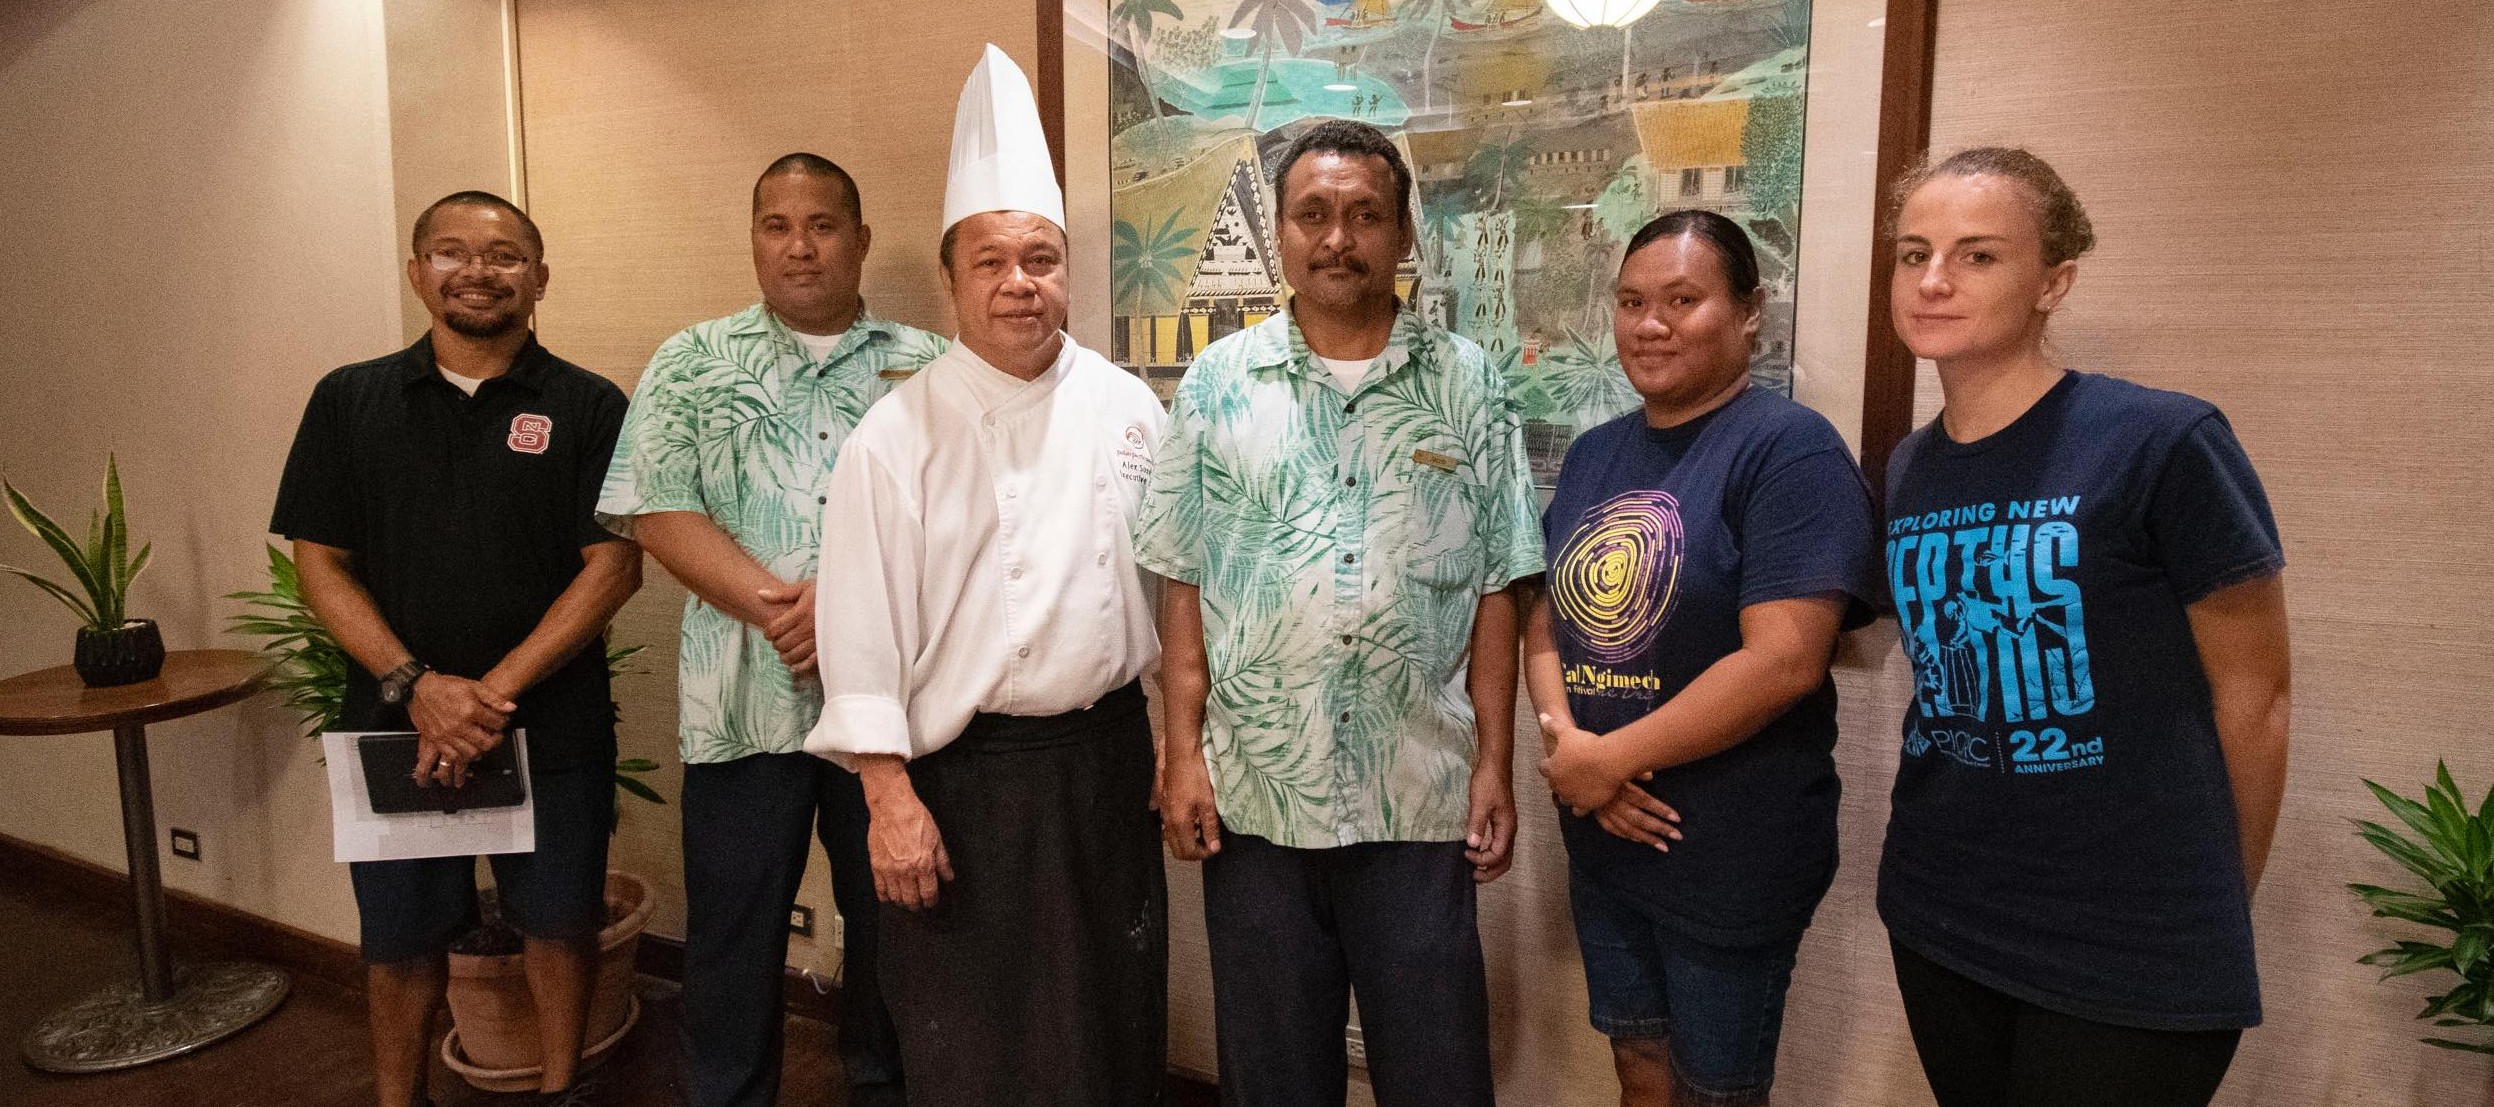 Palau Pacific Resort, SHIMBROS Inc., Bento Bako and MGTM Catering to serve at PICRC’s 23rd Anniversary Gala Dinner